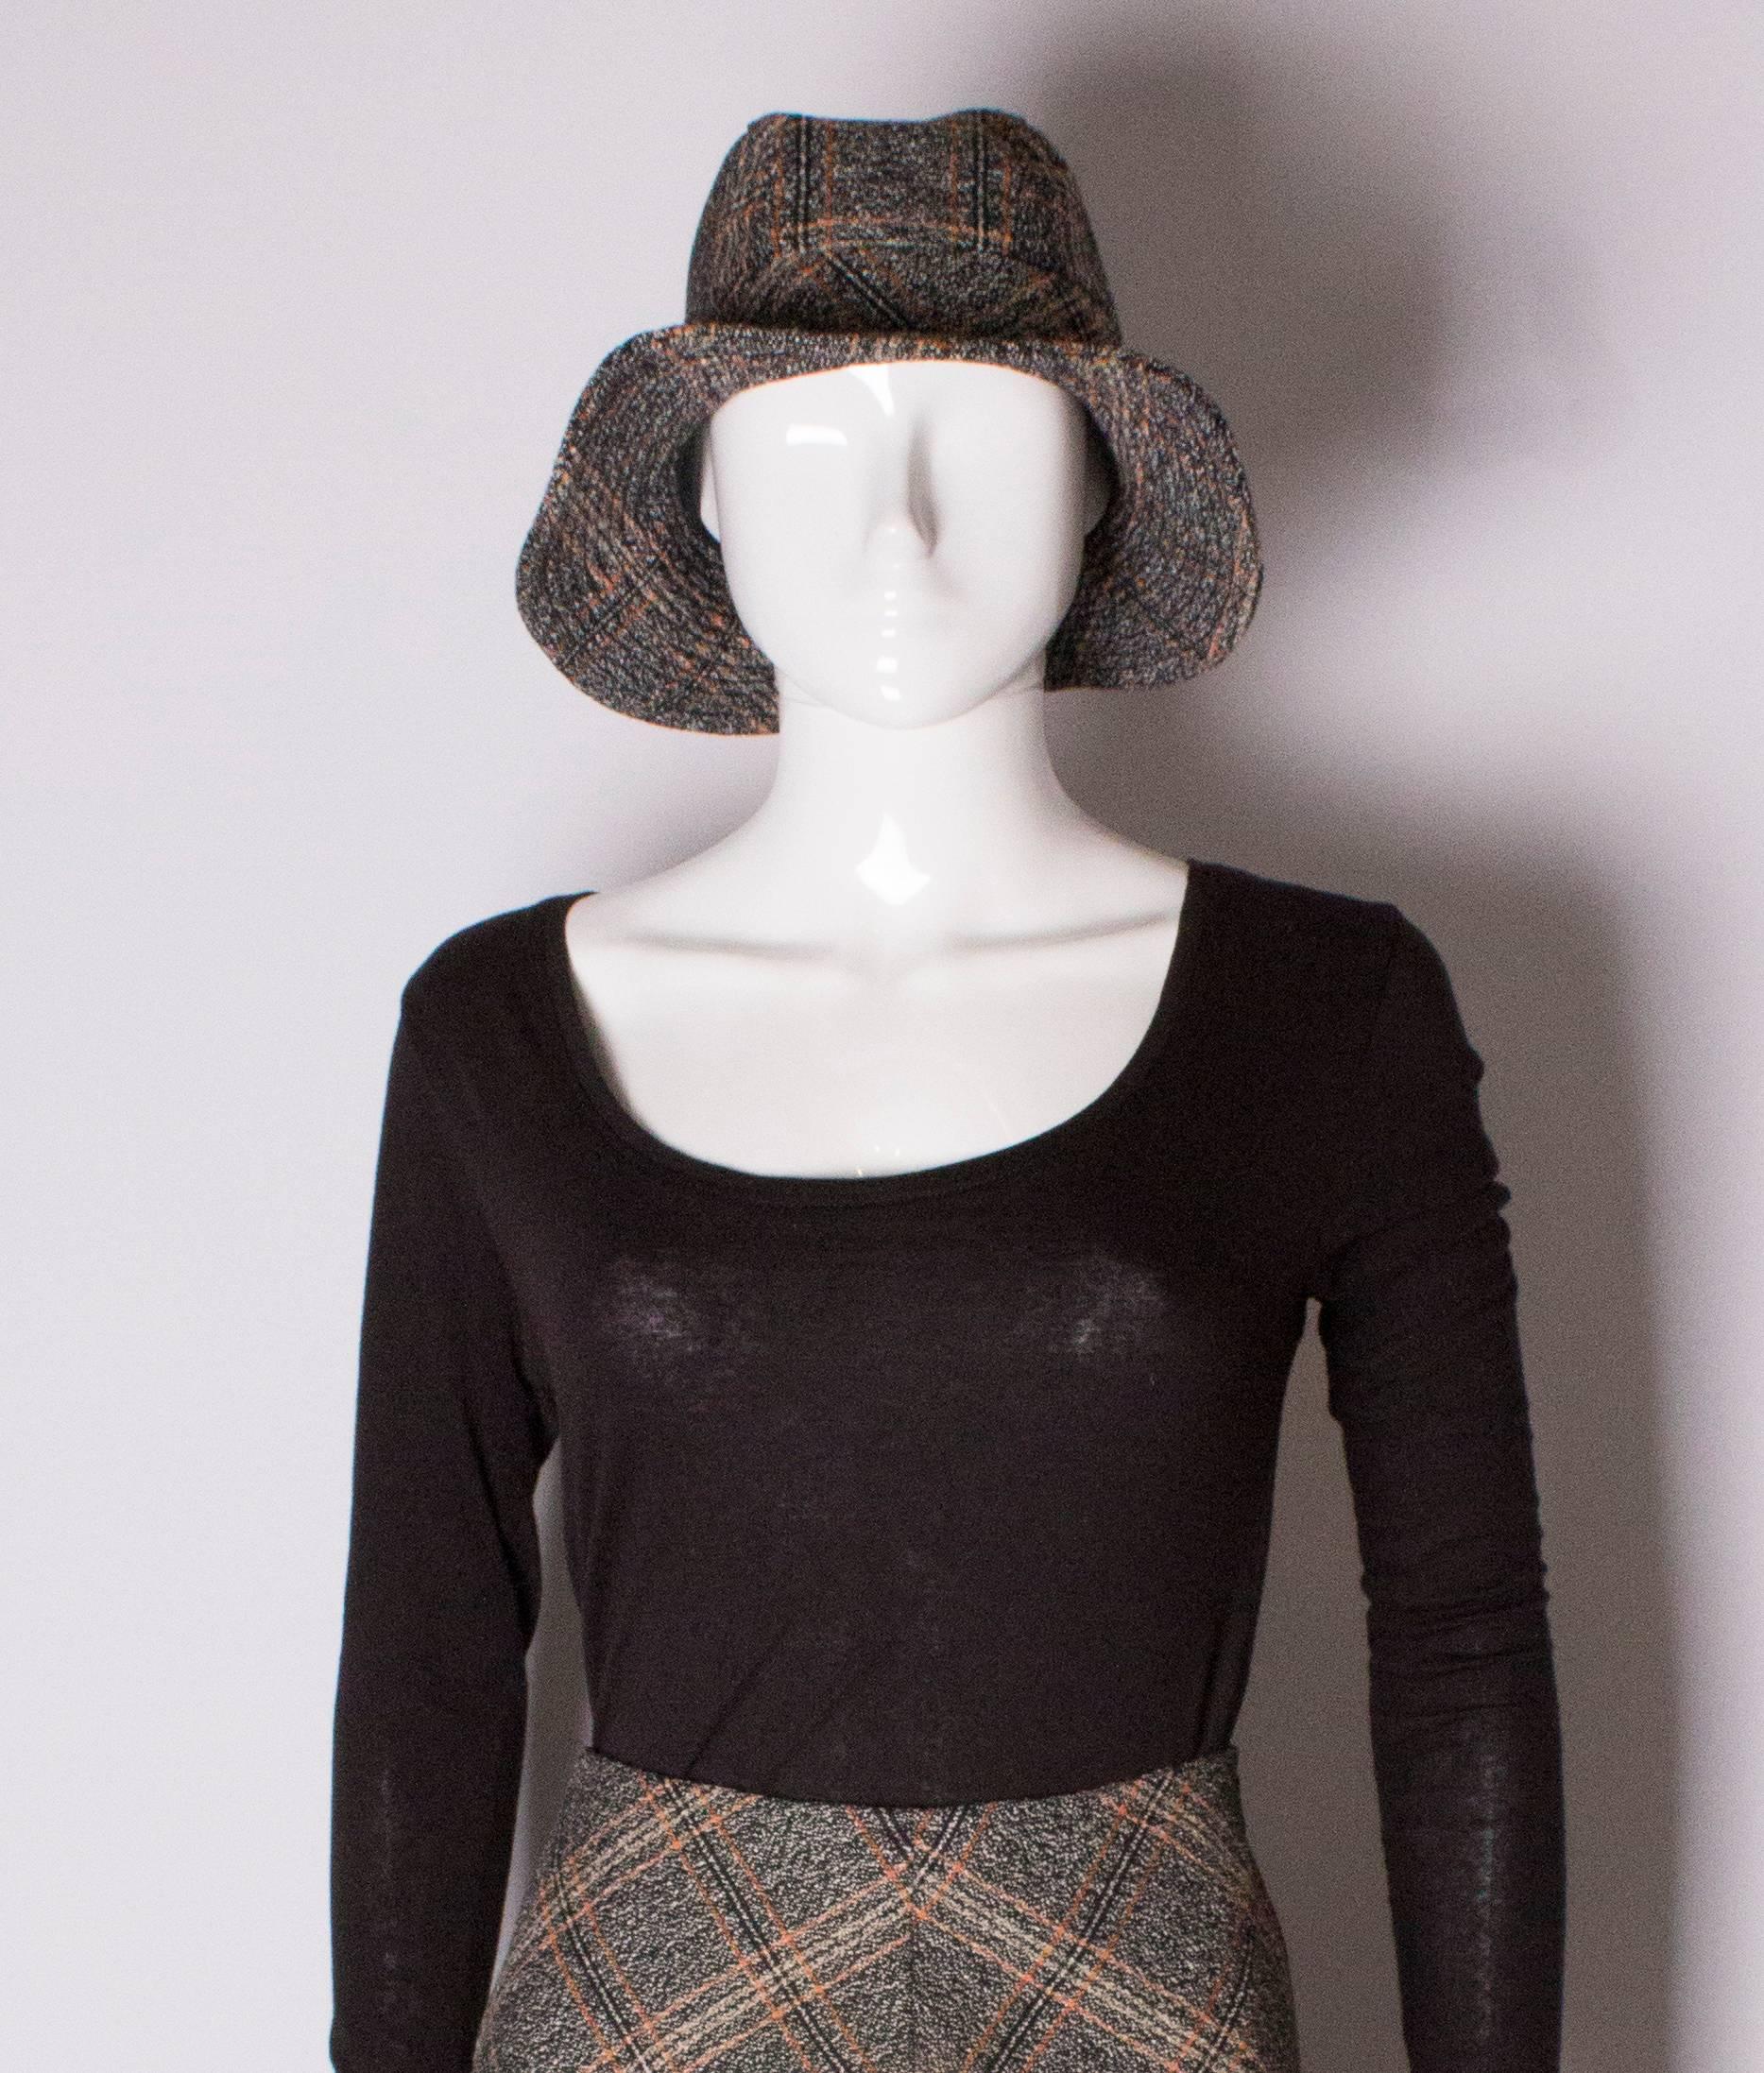 A great hat and skirt from Biba. The skirt is A line, with a central back zip. The inner circumference of the hat is 20''.